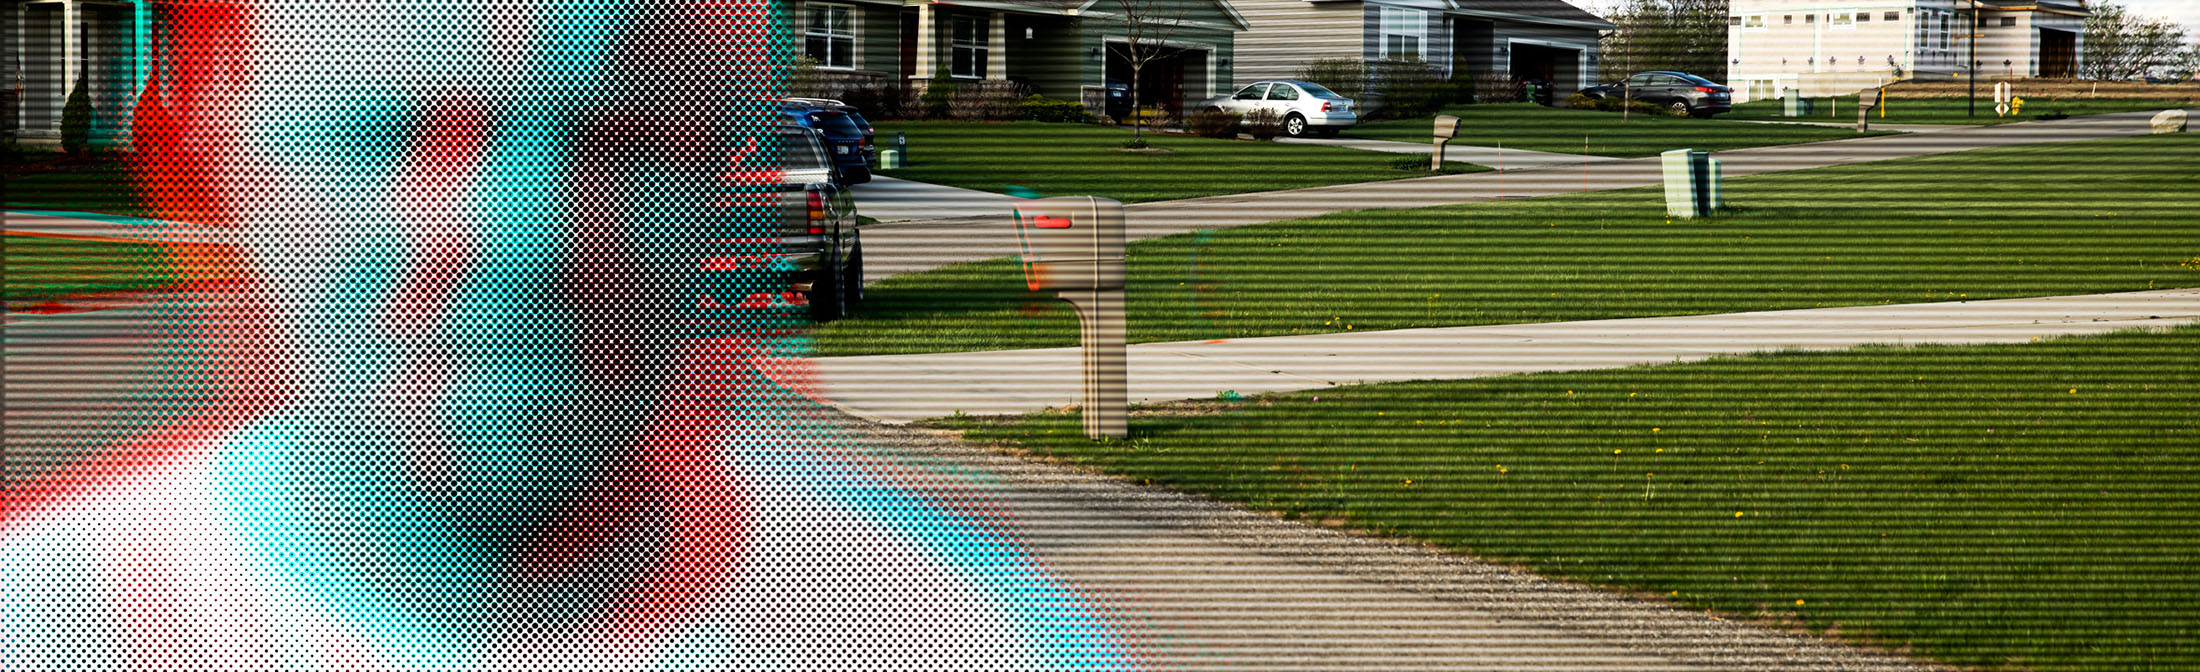 A glitch-like image of a man in a neighborhood with houses